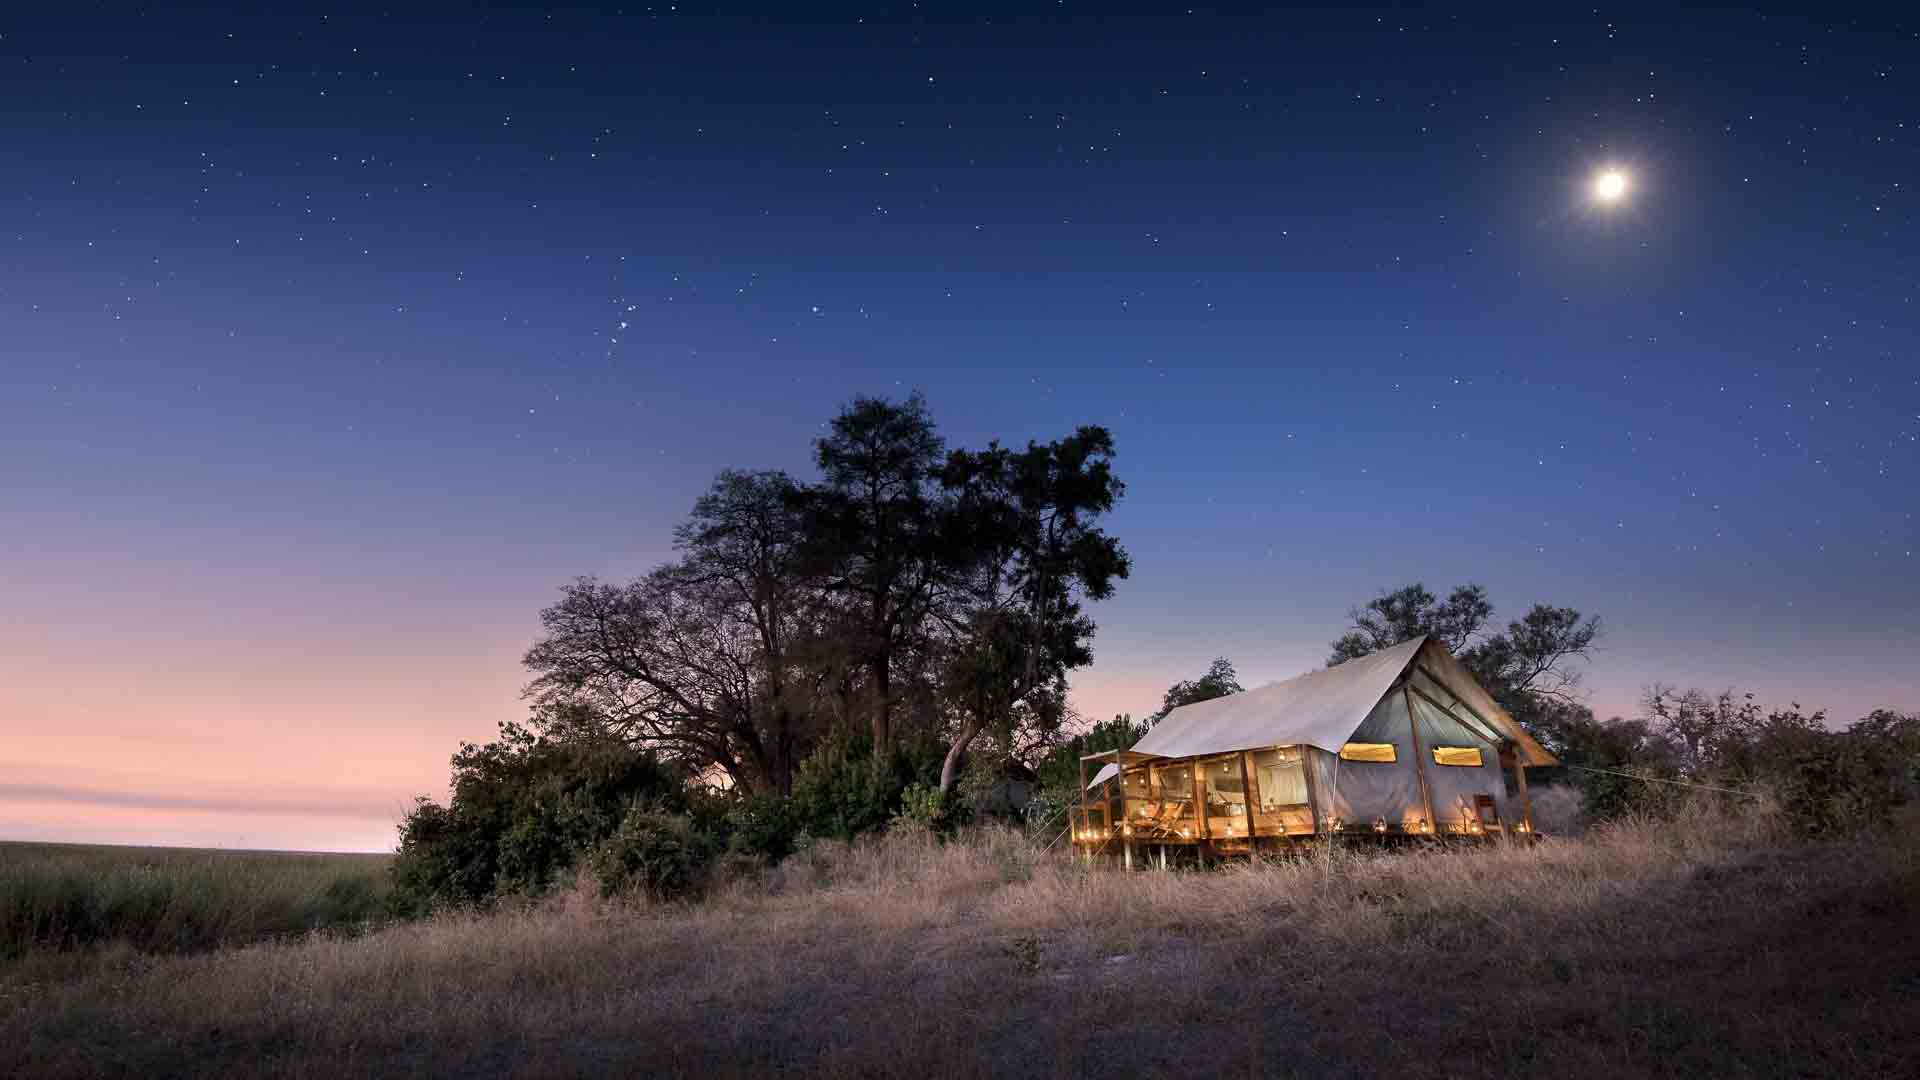 Linyanti Ebony Tented Camp in all its splendor - an epic off the beaten track Southern Africa safari camp.